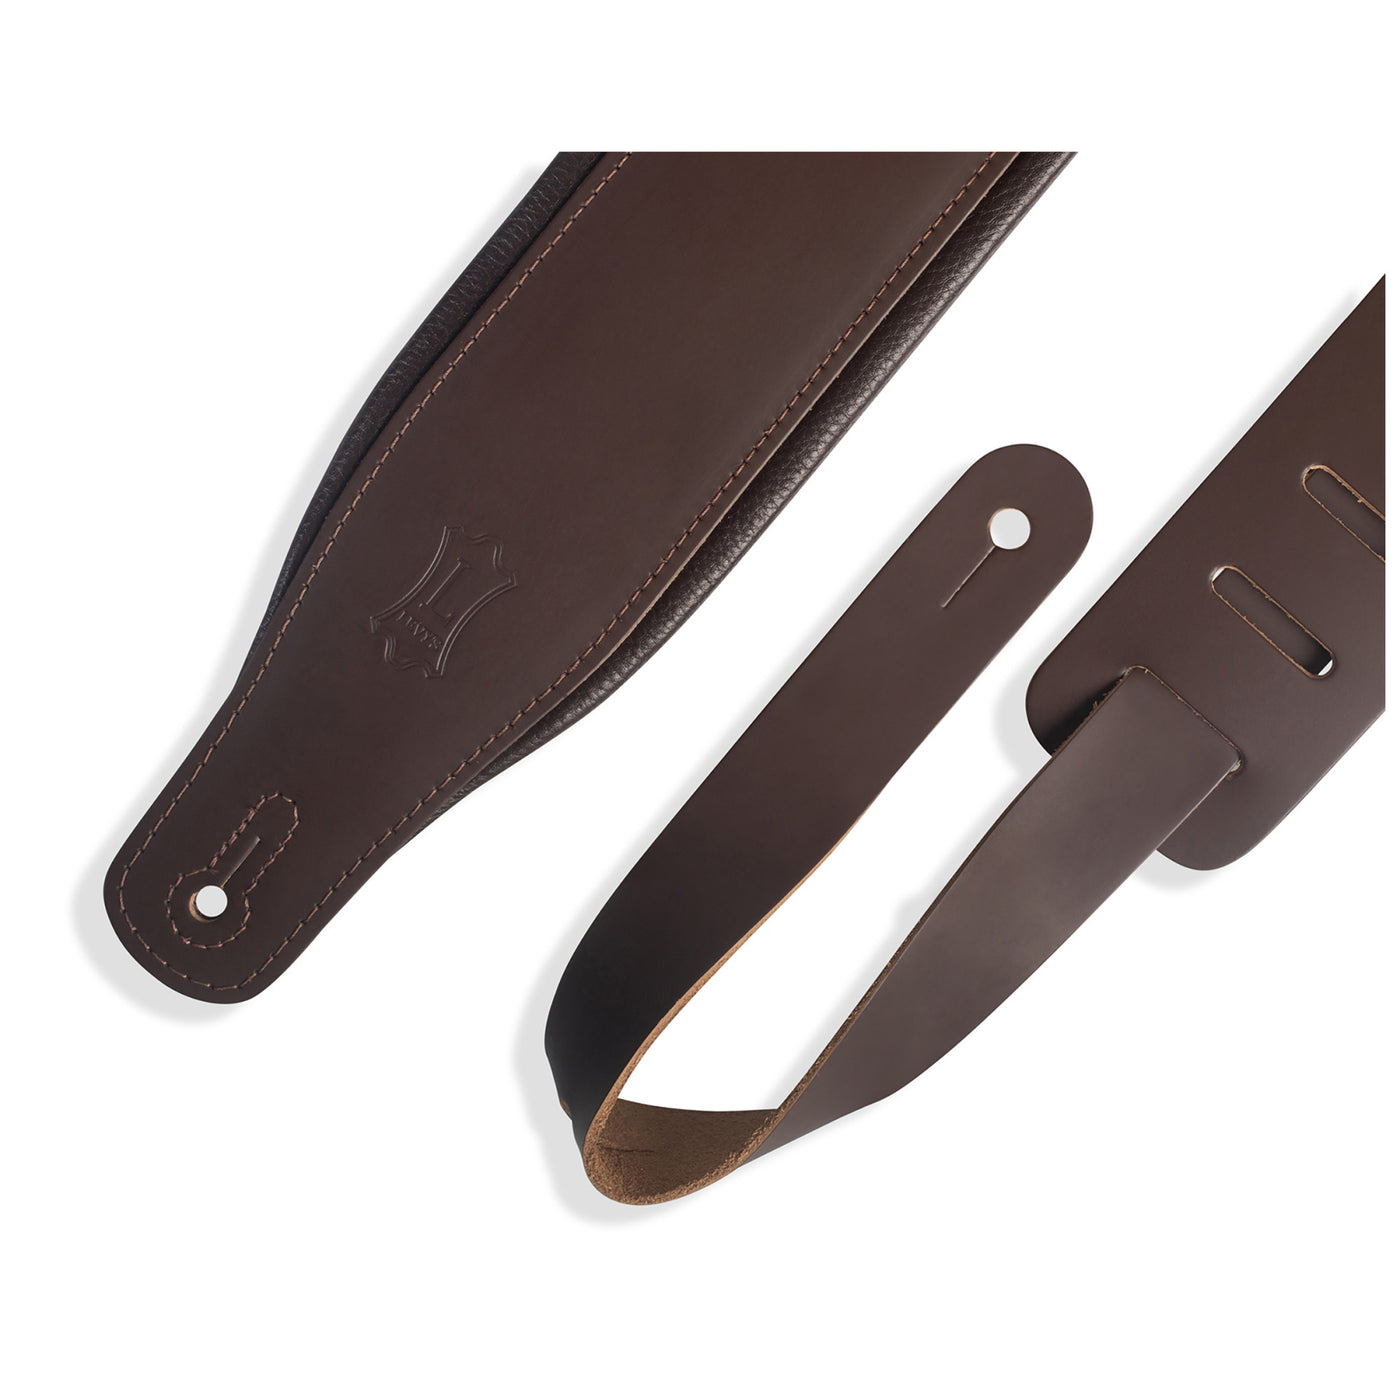 Levy's 3" Padded Leather Strap in Dark Brown with Dark Brown Backing